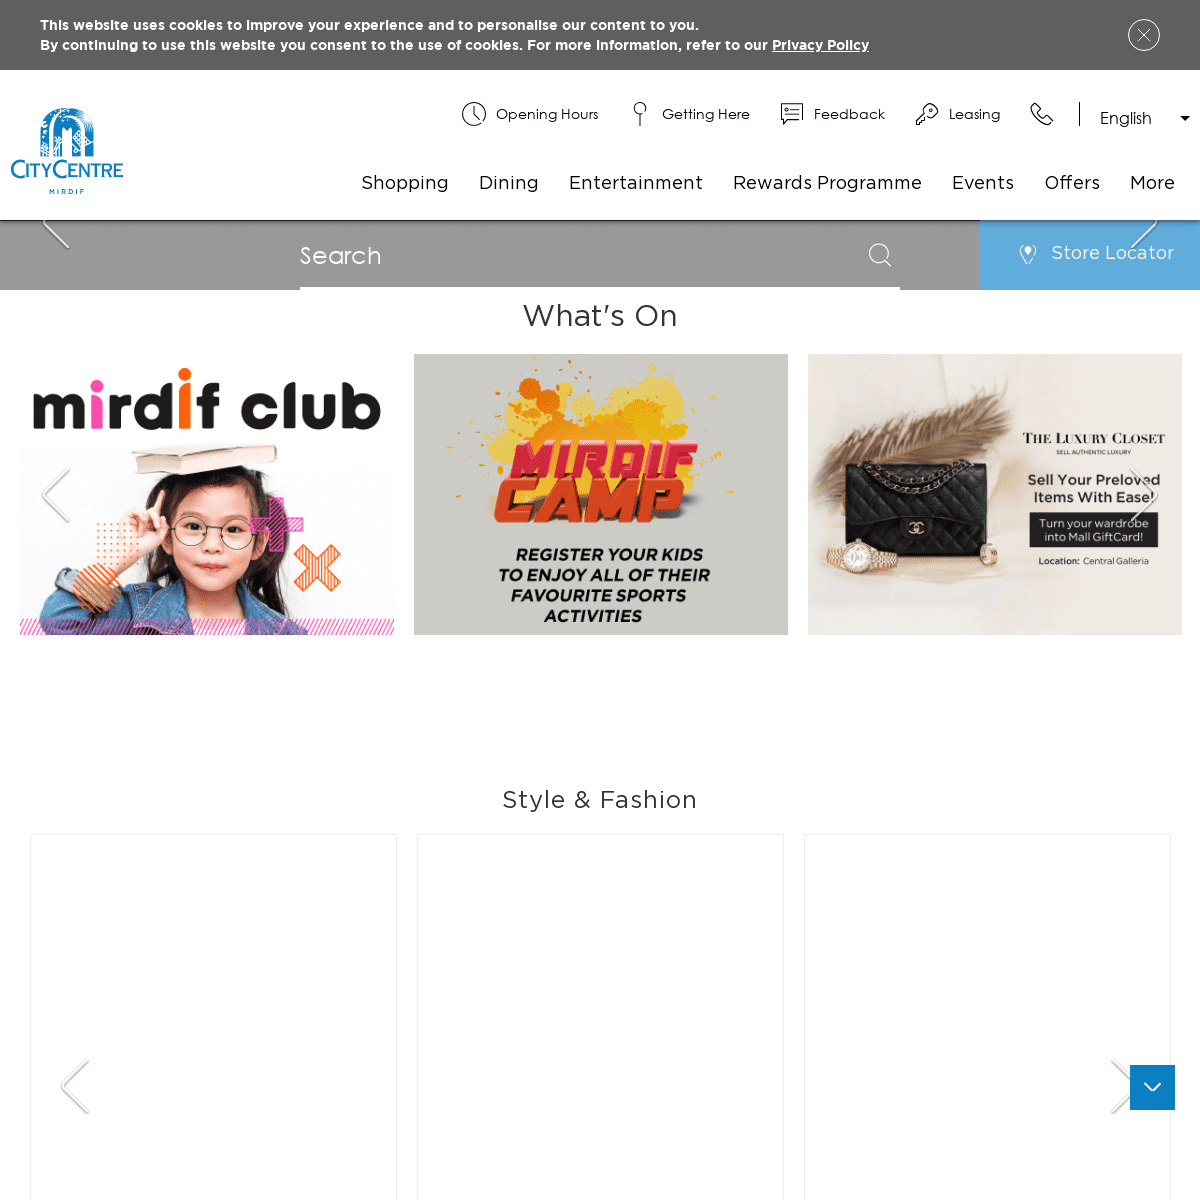 A complete backup of https://citycentremirdif.com